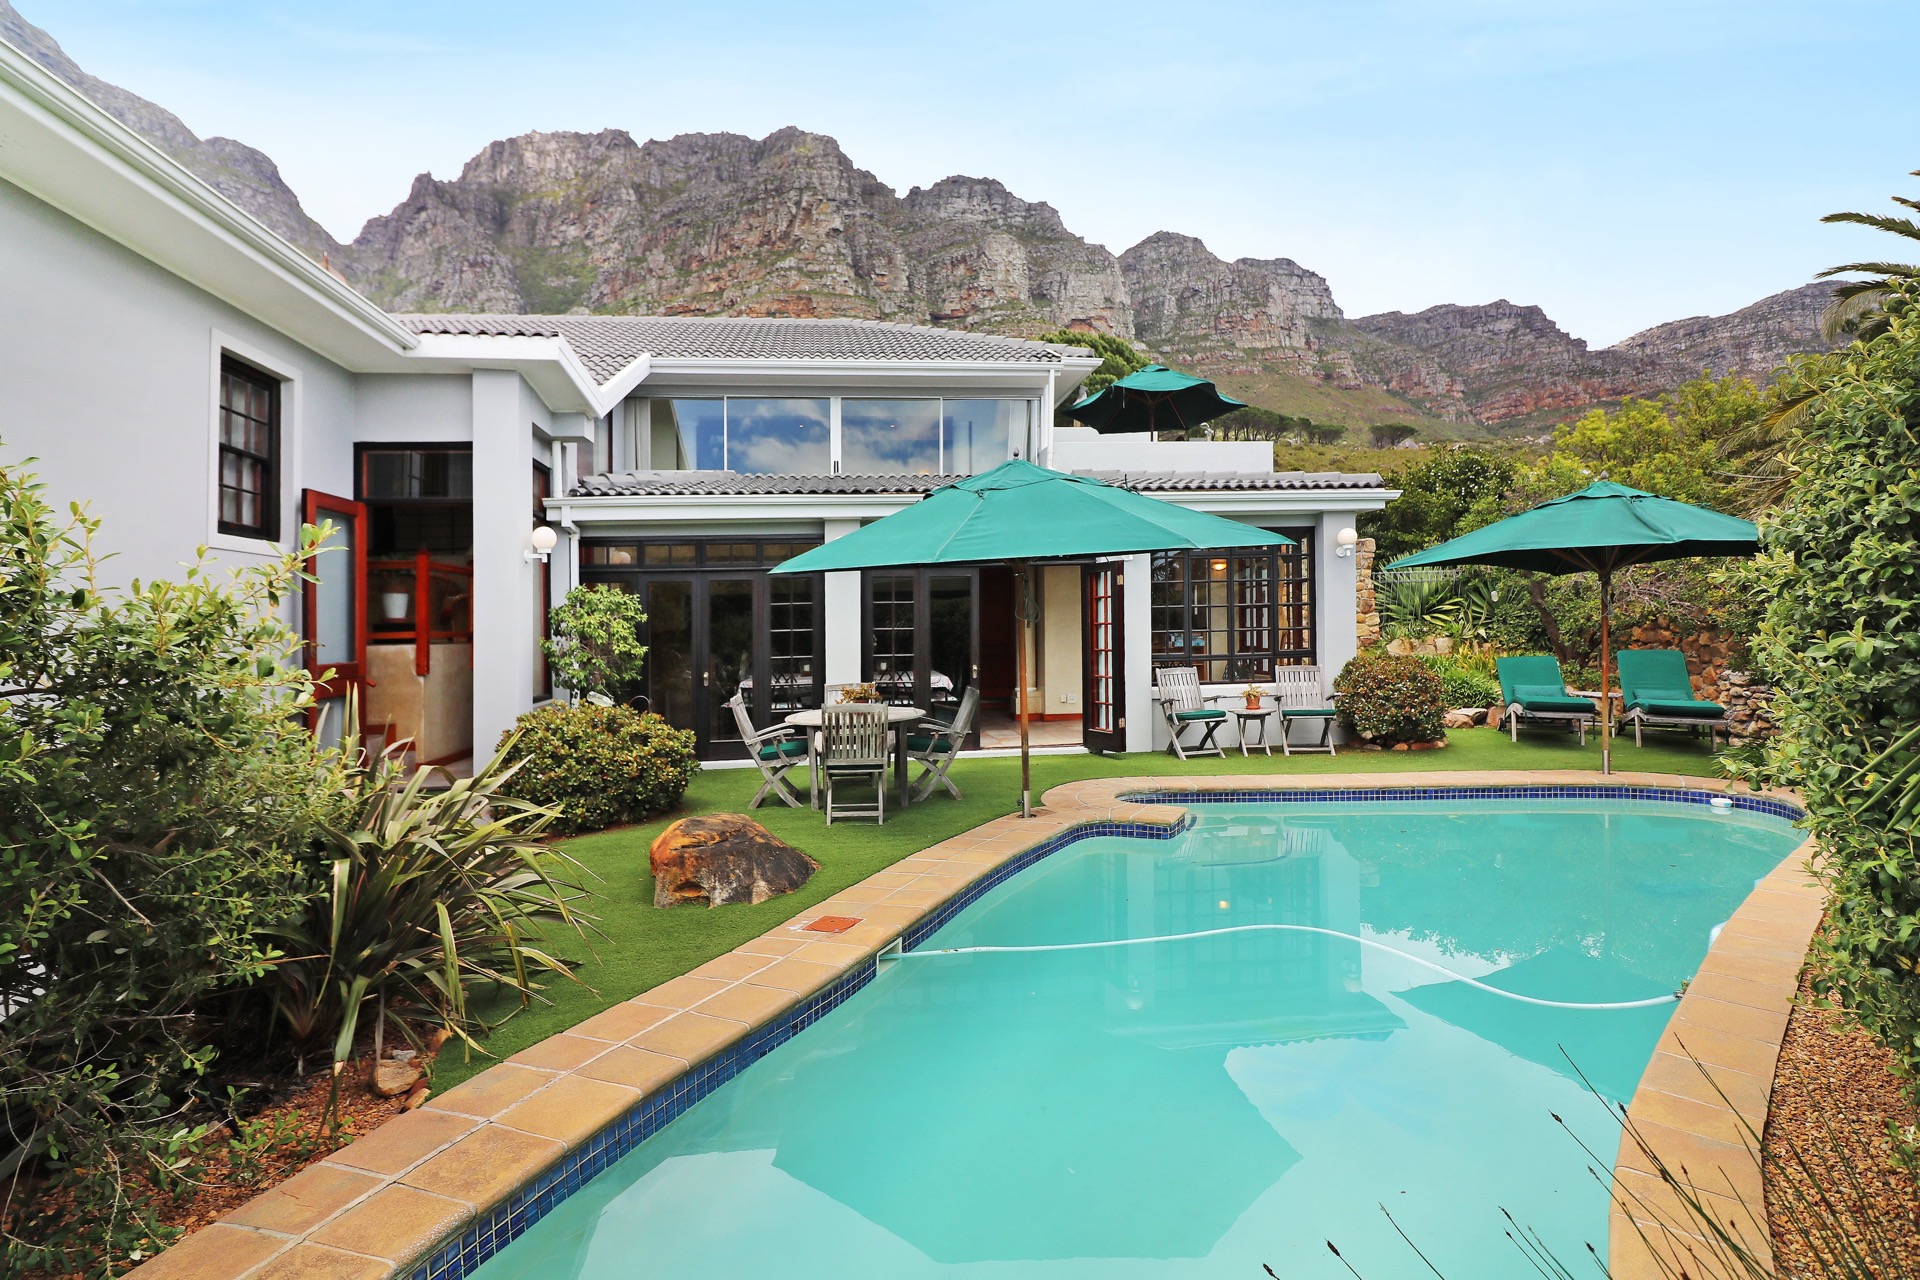 Classic 4 Bedroom House For Sale in Camps Bay, Cape Town